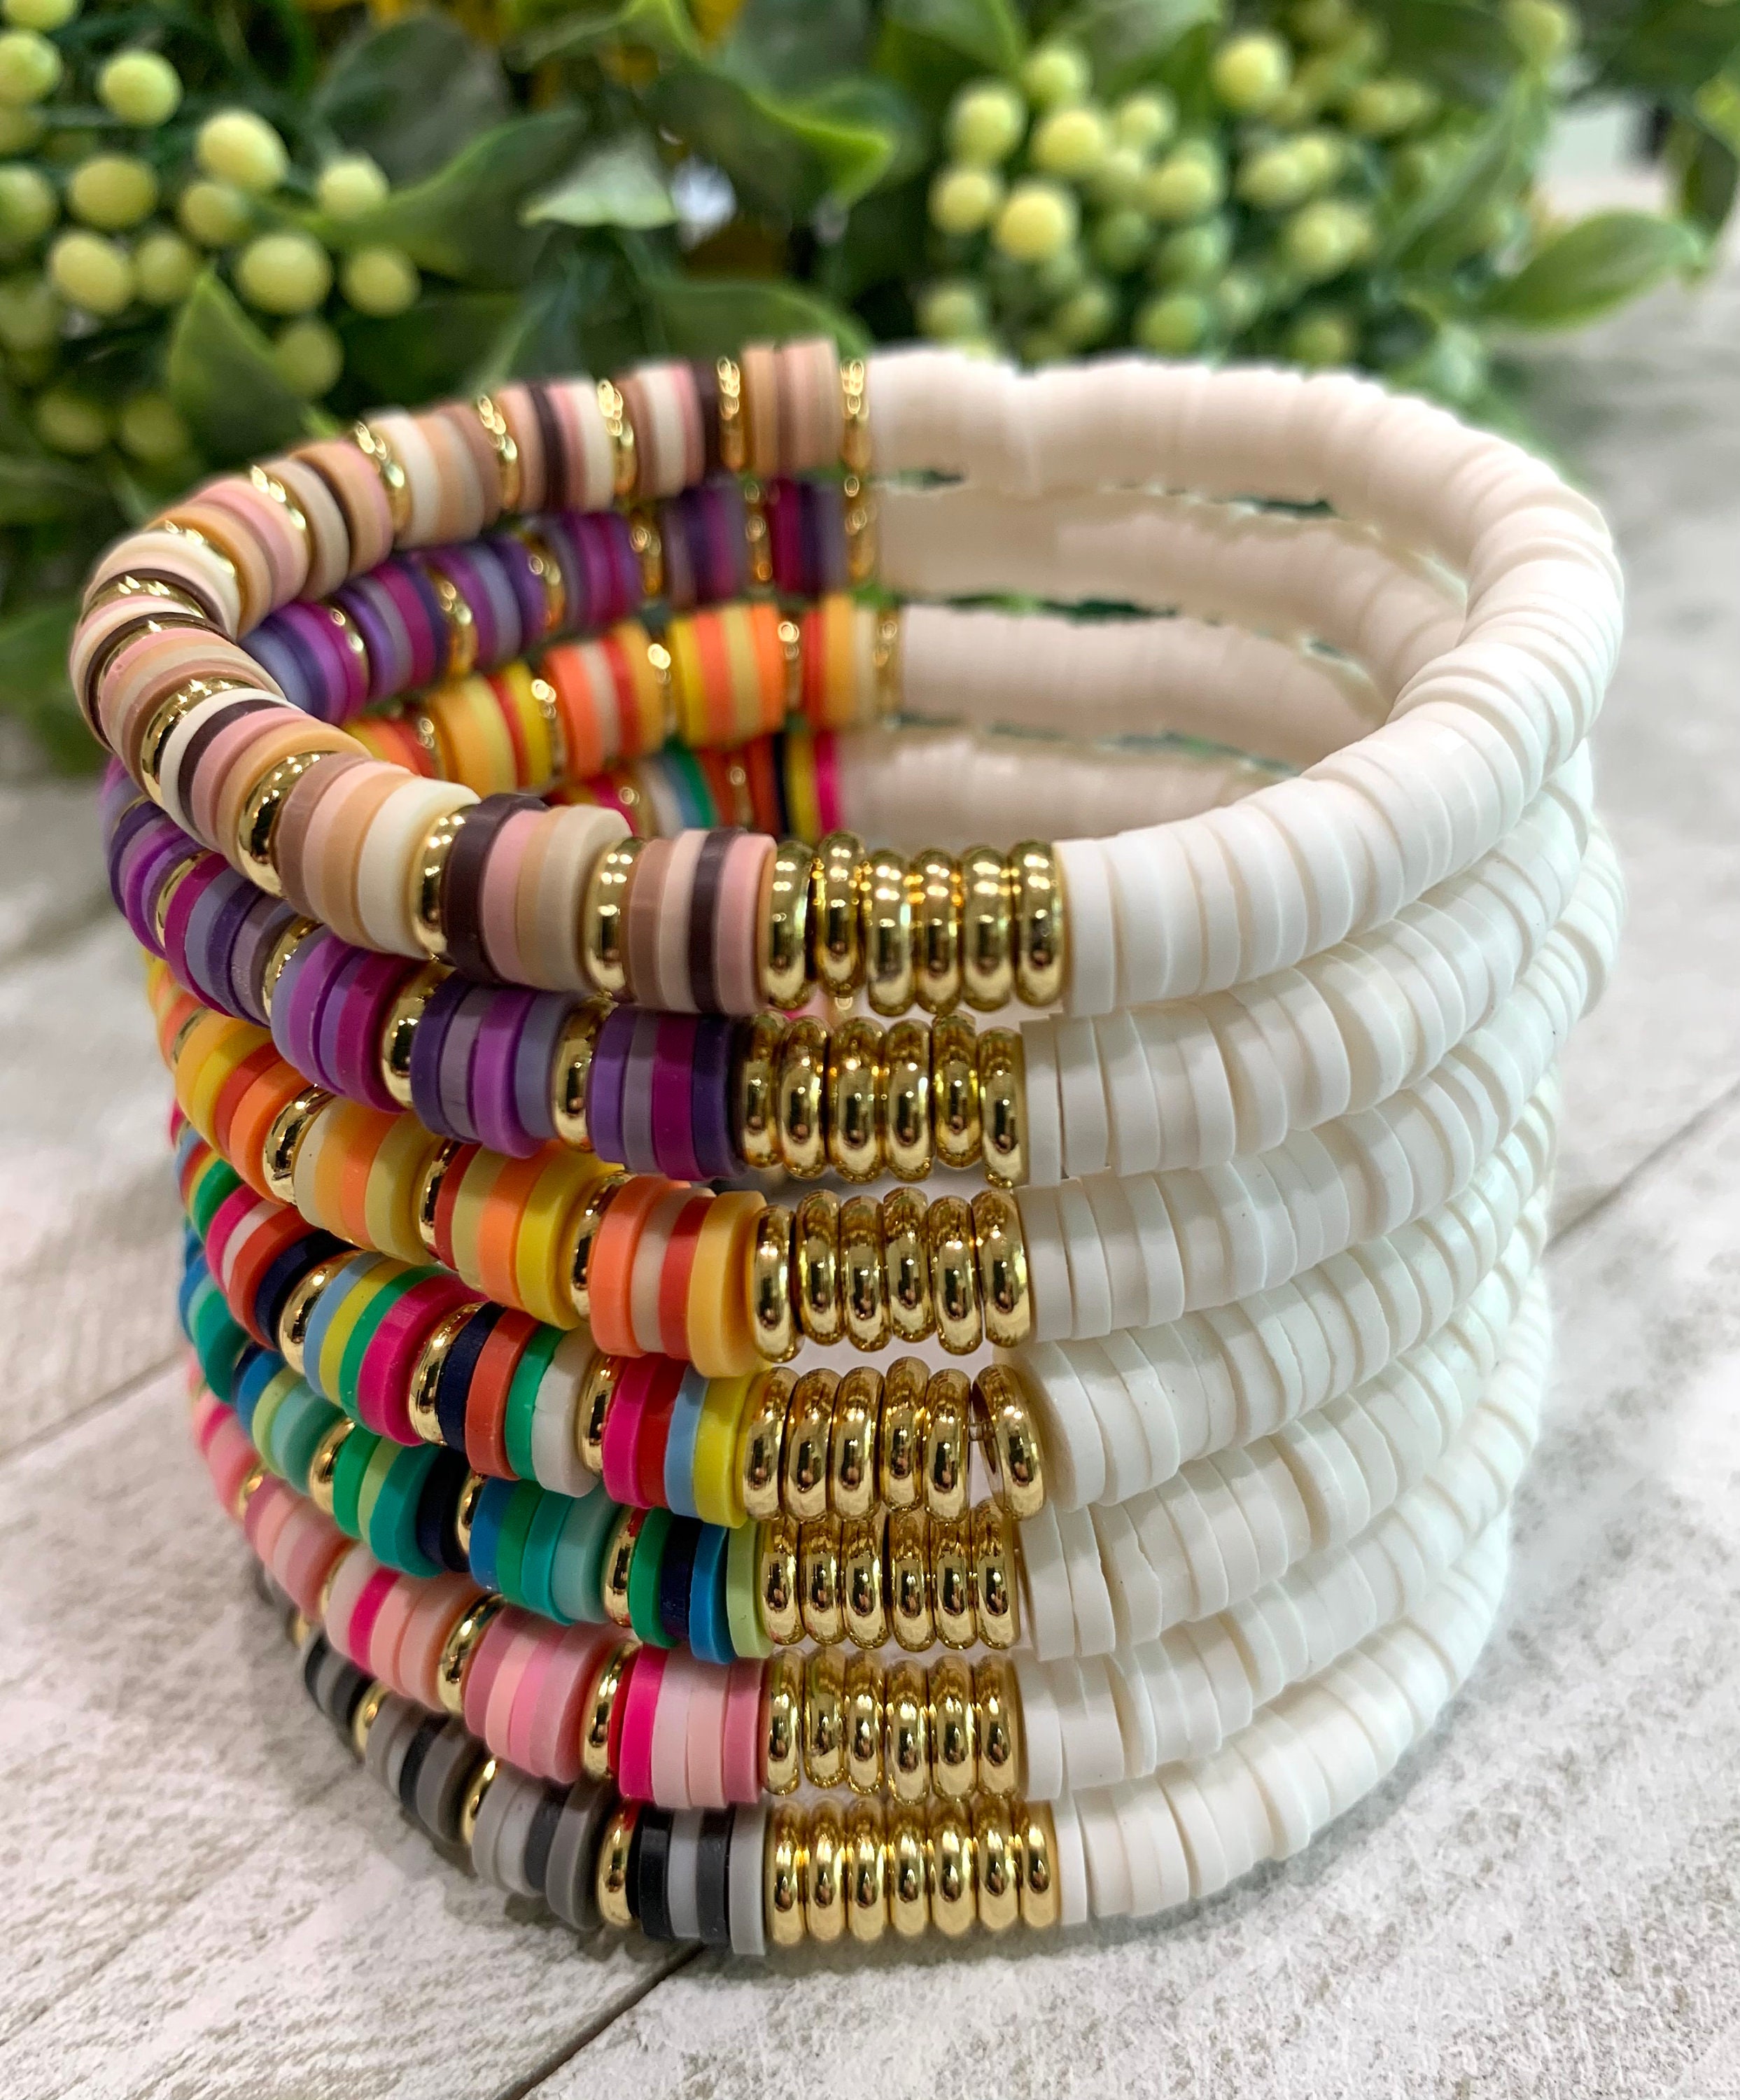 100Pcs Colorful Round Beads, DIY Resin Handcrafted Round Bracelet Necklace  Beads for Summer Beading Friendship Bracelet Mother's Day Jewelry Making